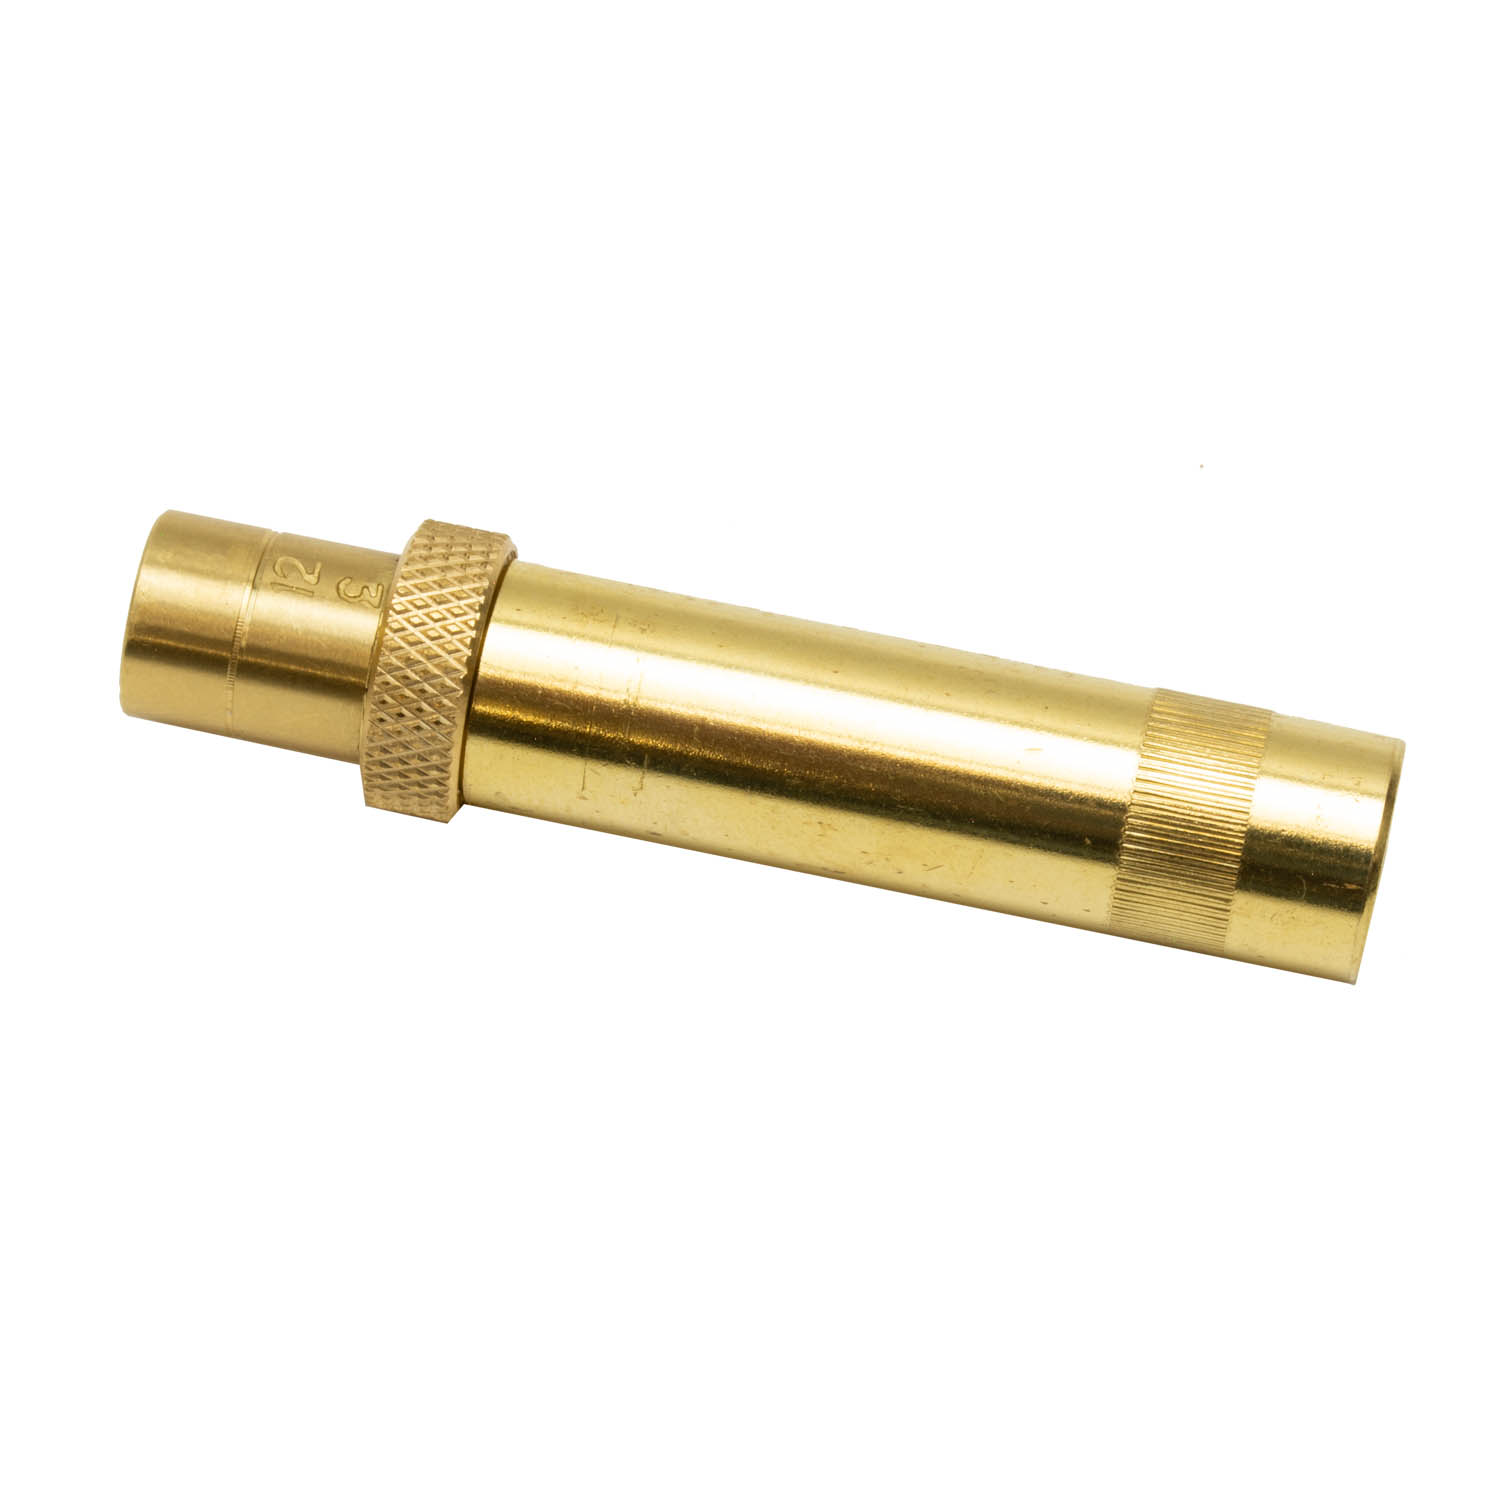 Traditions Brass Field Powder Measure, 30-120 Grains: MGW